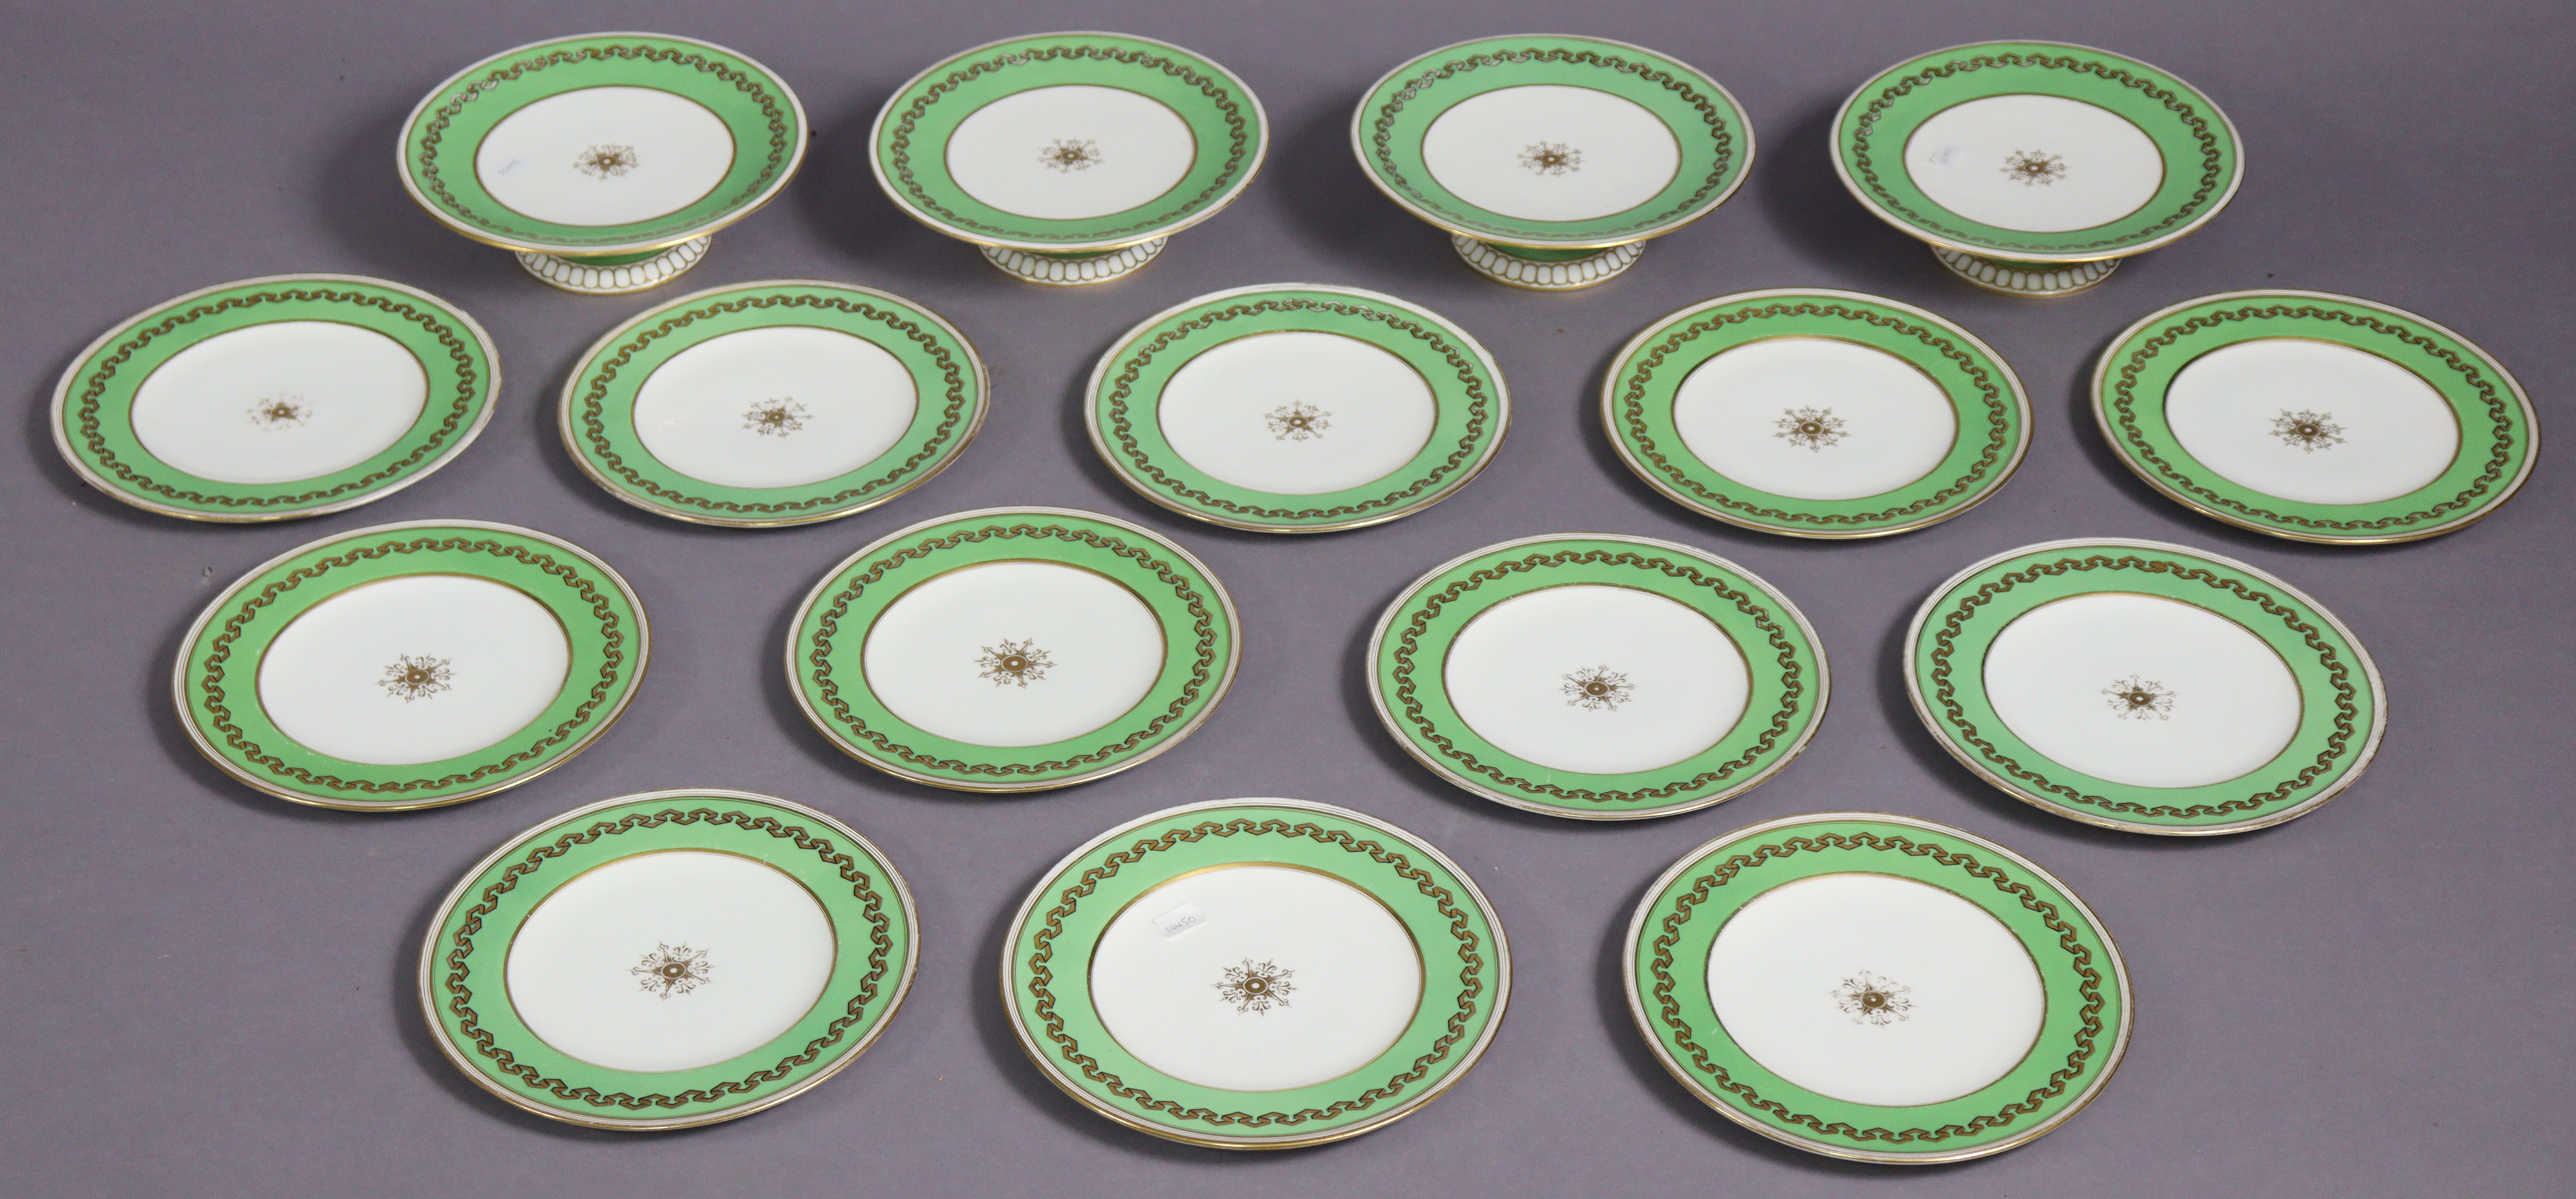 An early 20th century English porcelain part dessert service with apple-green borders & gilt